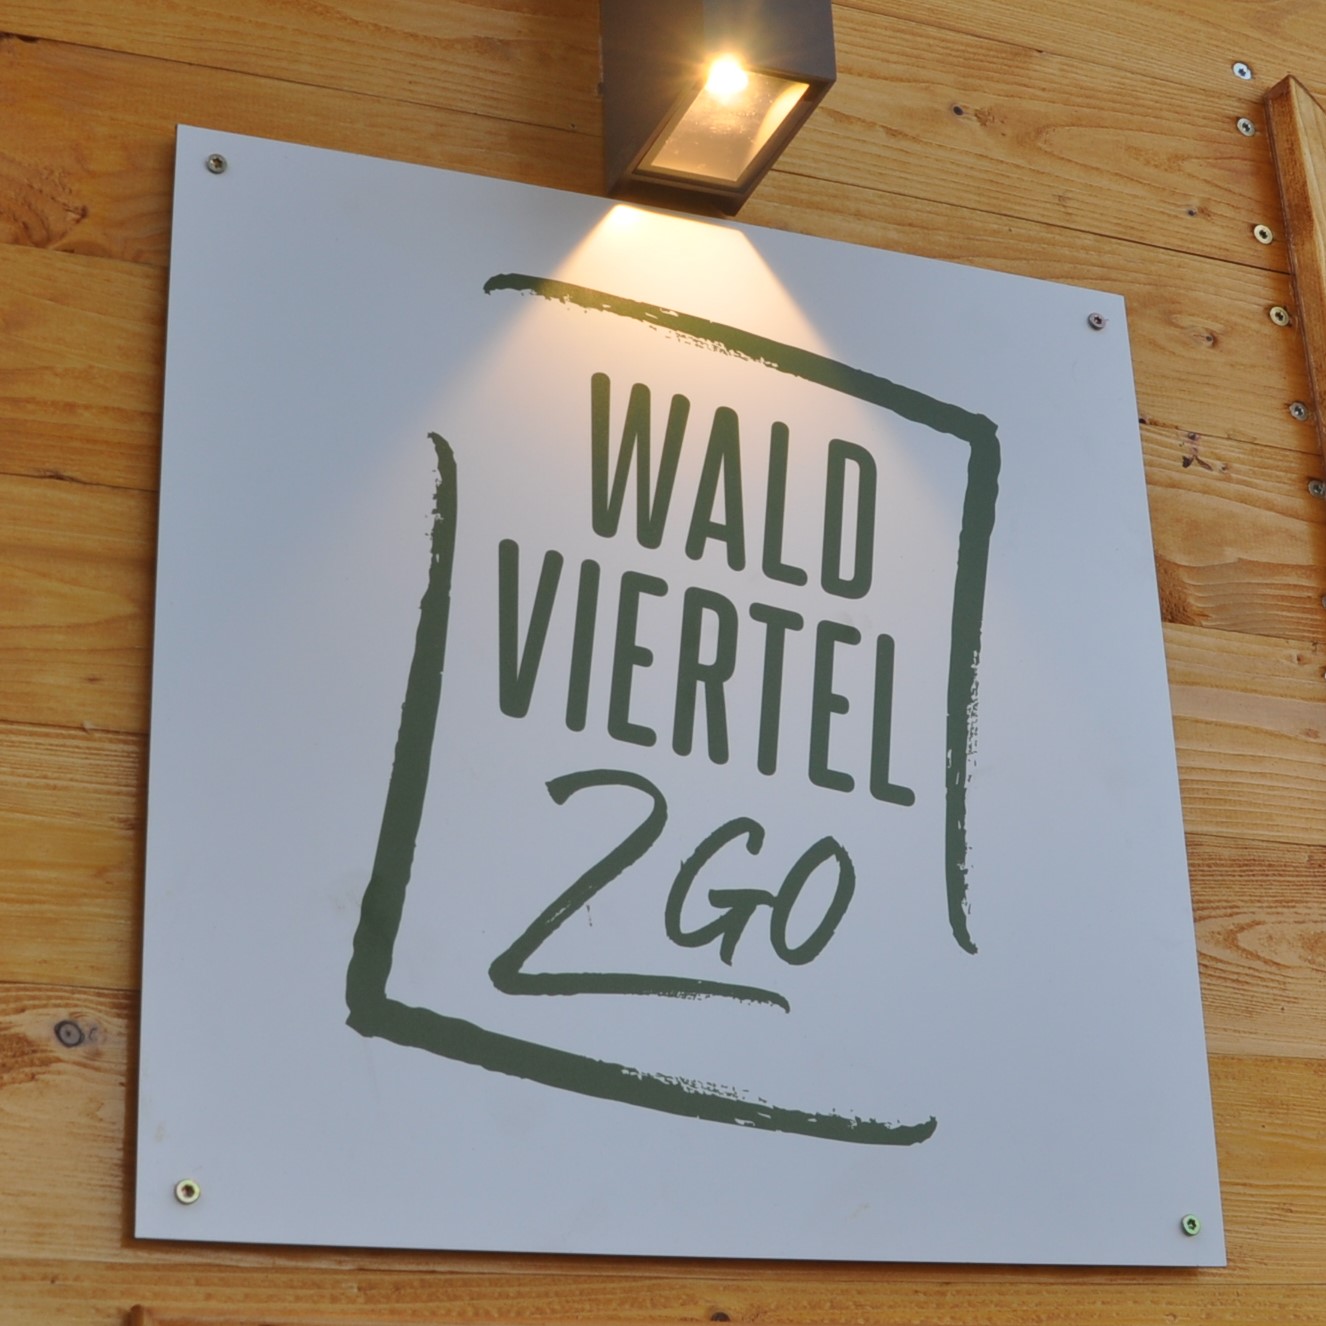 Read more about the article Waldviertel2Go